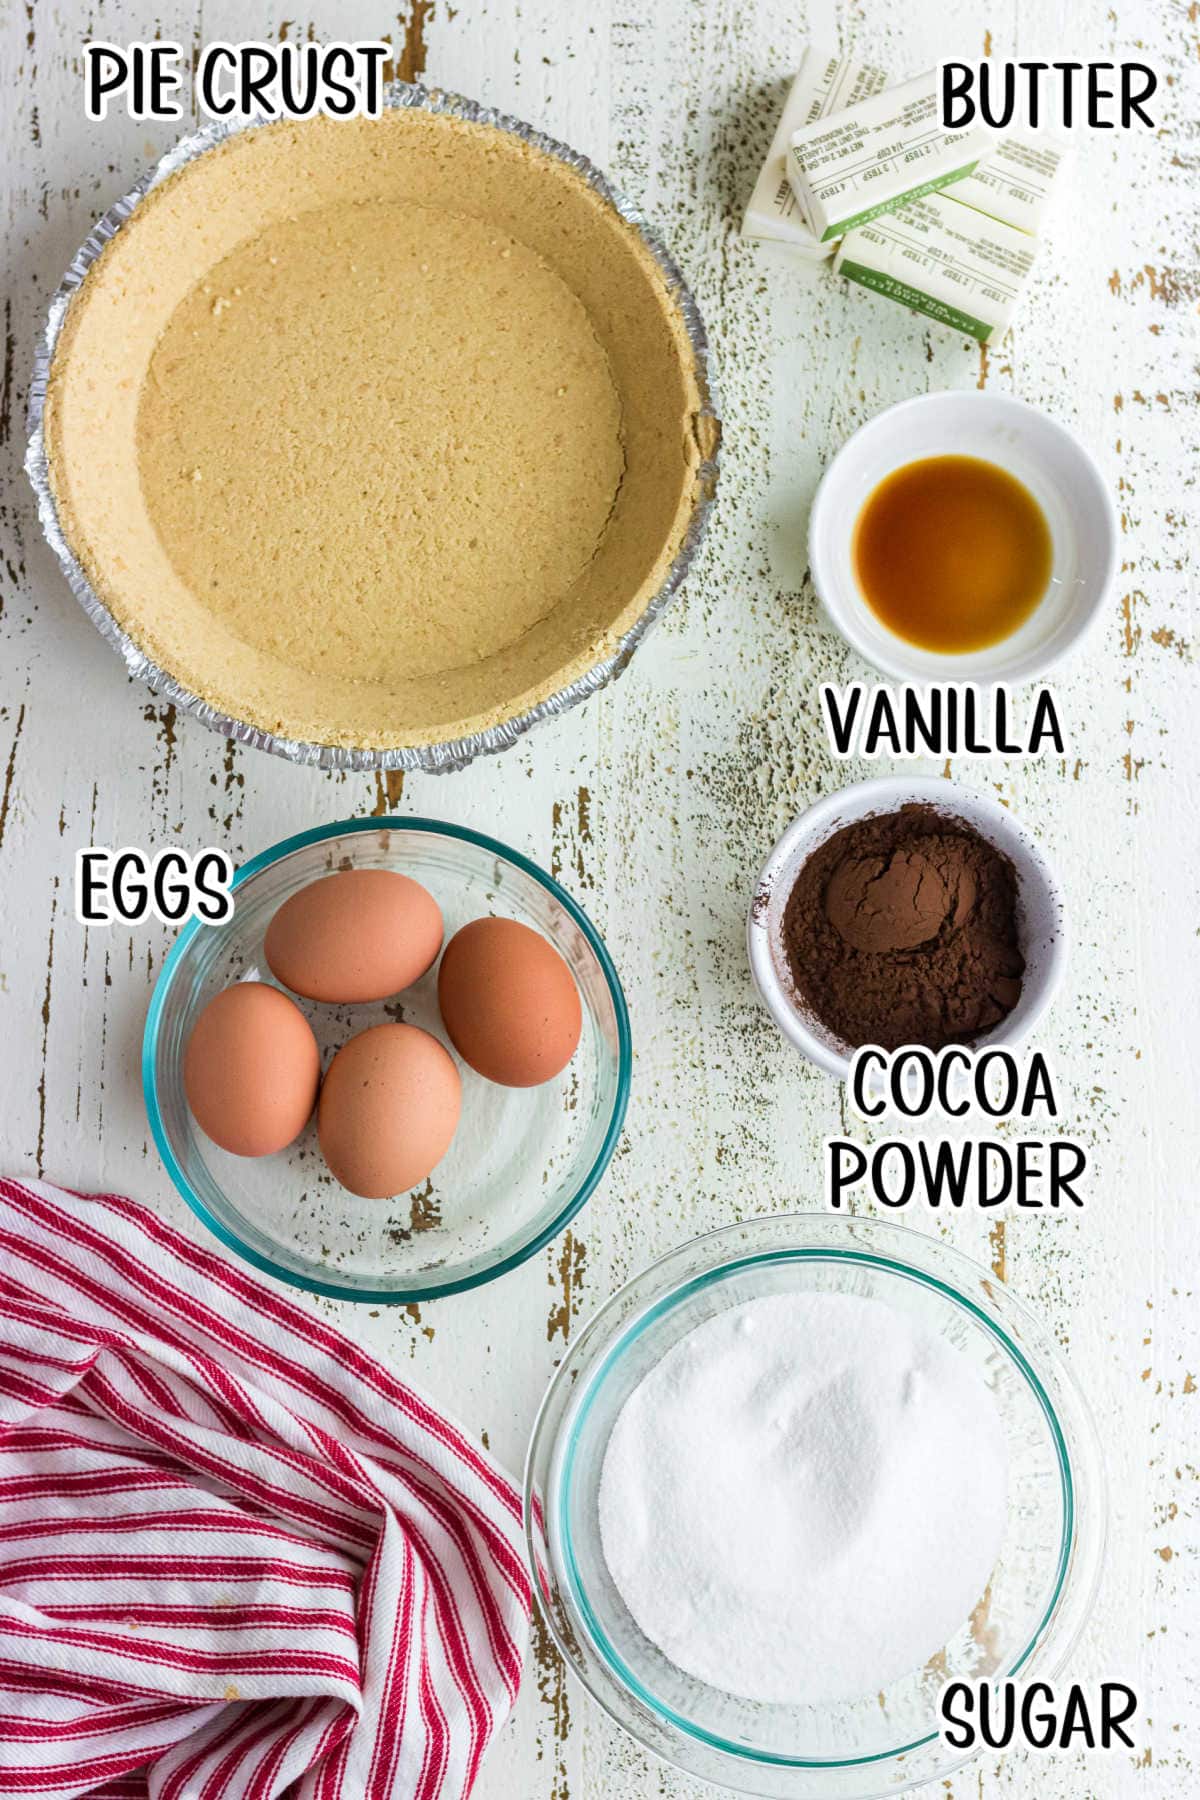 Labeled ingredients for French Silk Pie.